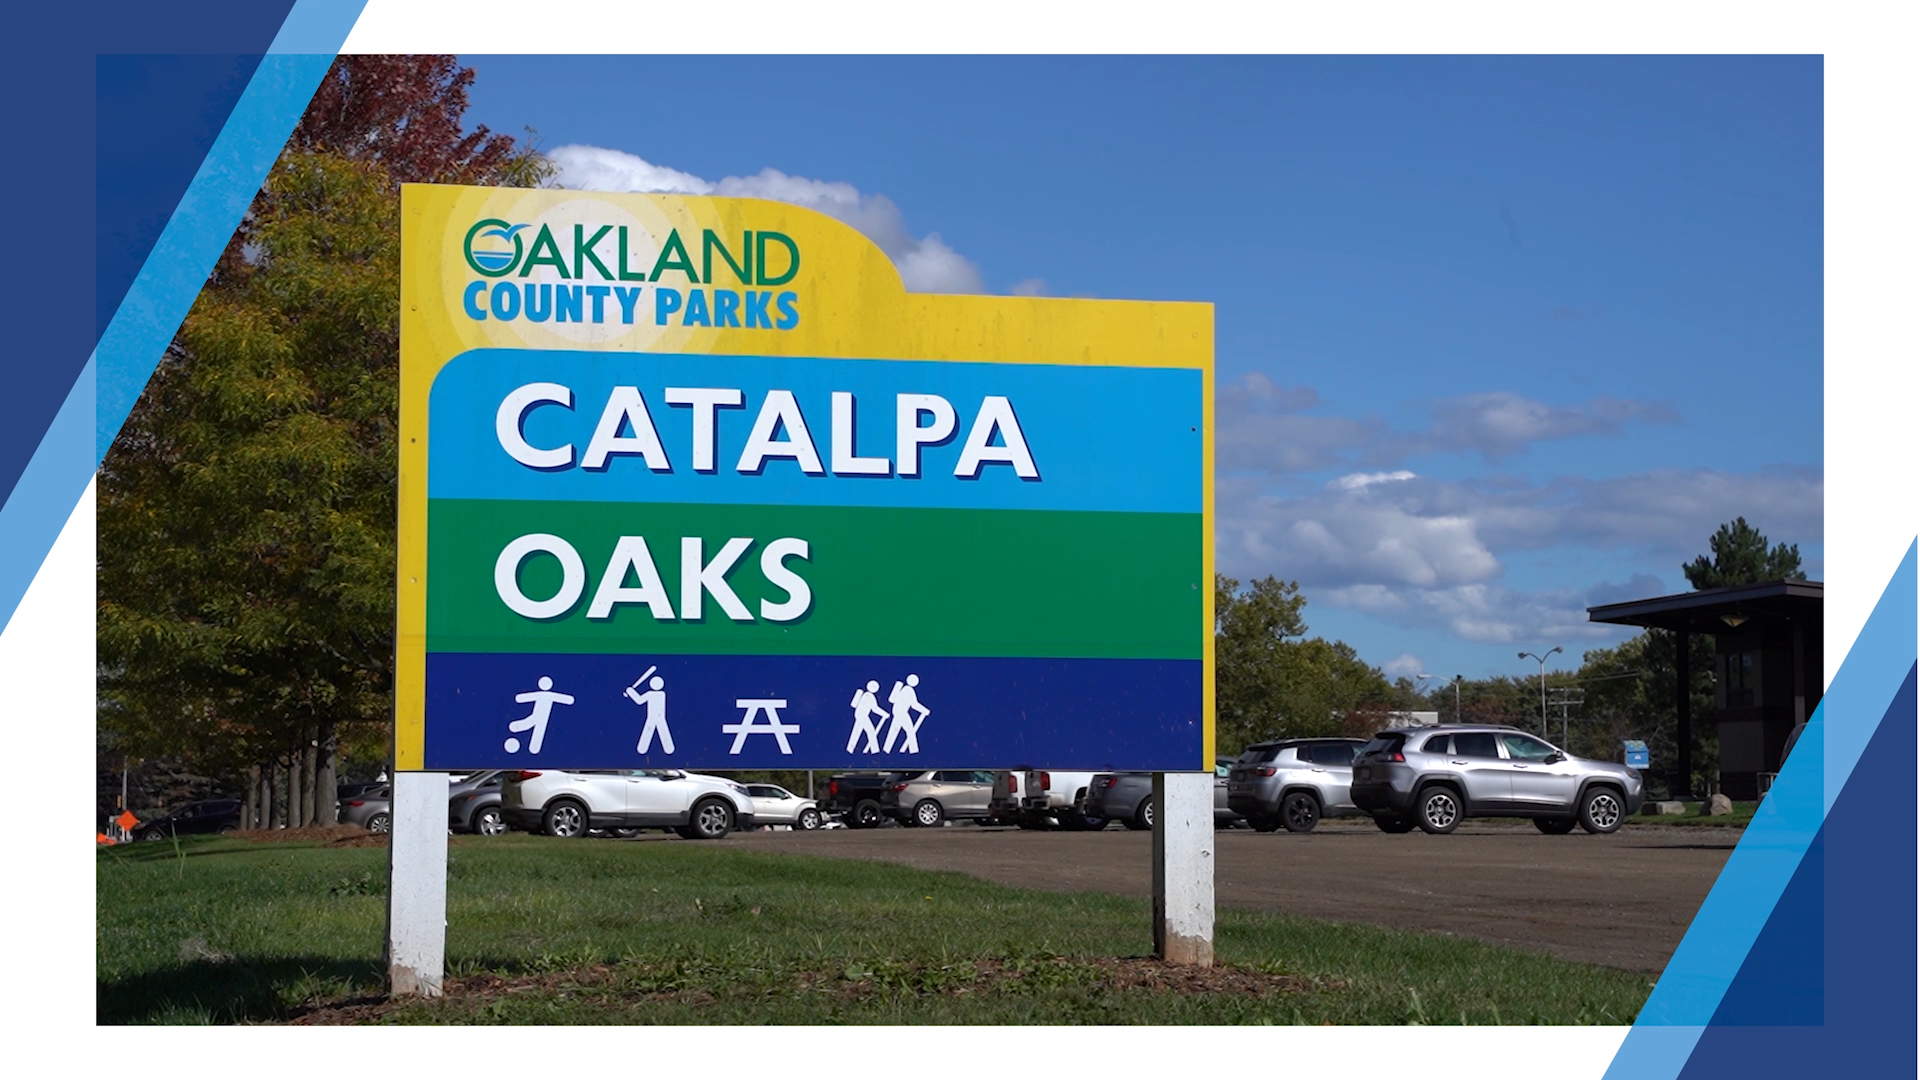 A picture of the Oakland County Parks Catalapa Oaks sign that is posted in front of its parking lot